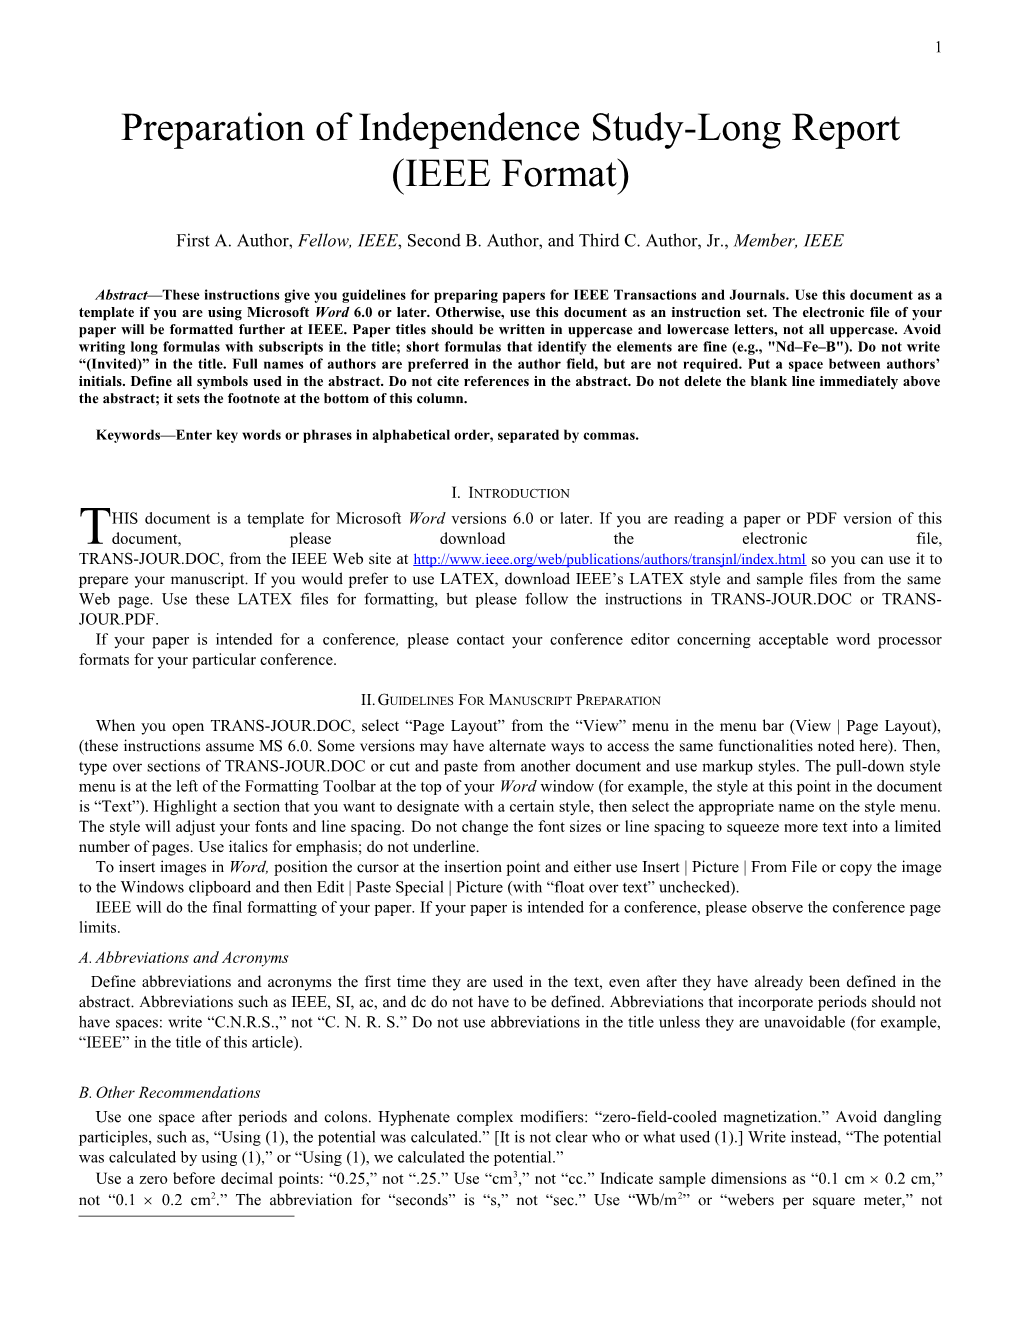 Preparation of Independence Study-Long Report (IEEE Format)